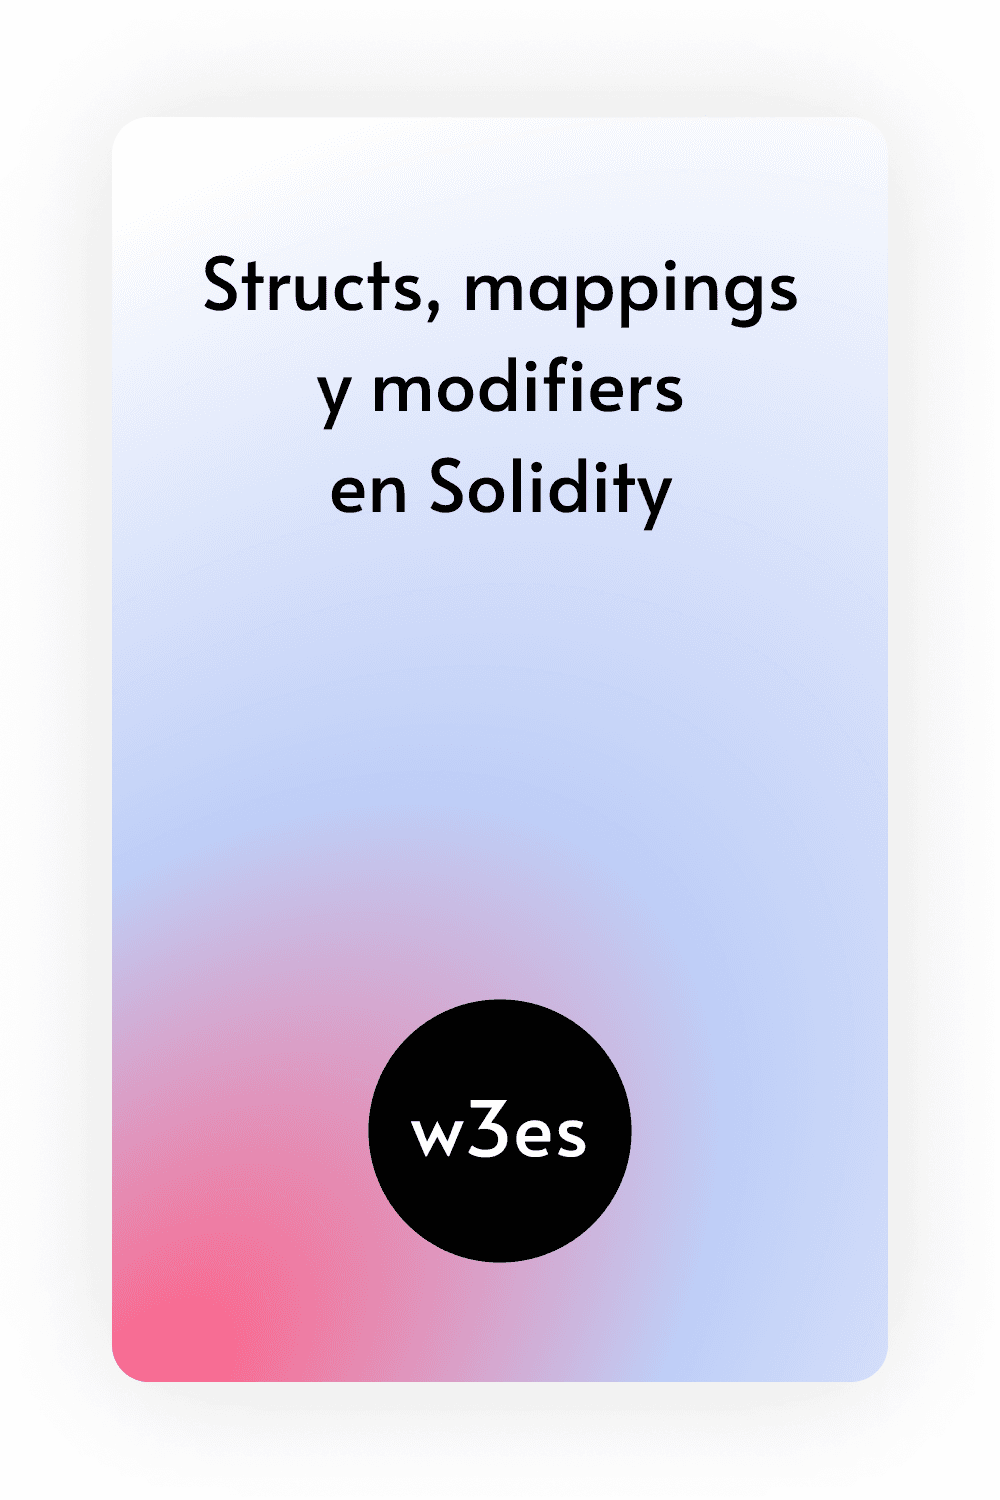 Structs, mappings y modifiers en Solidity